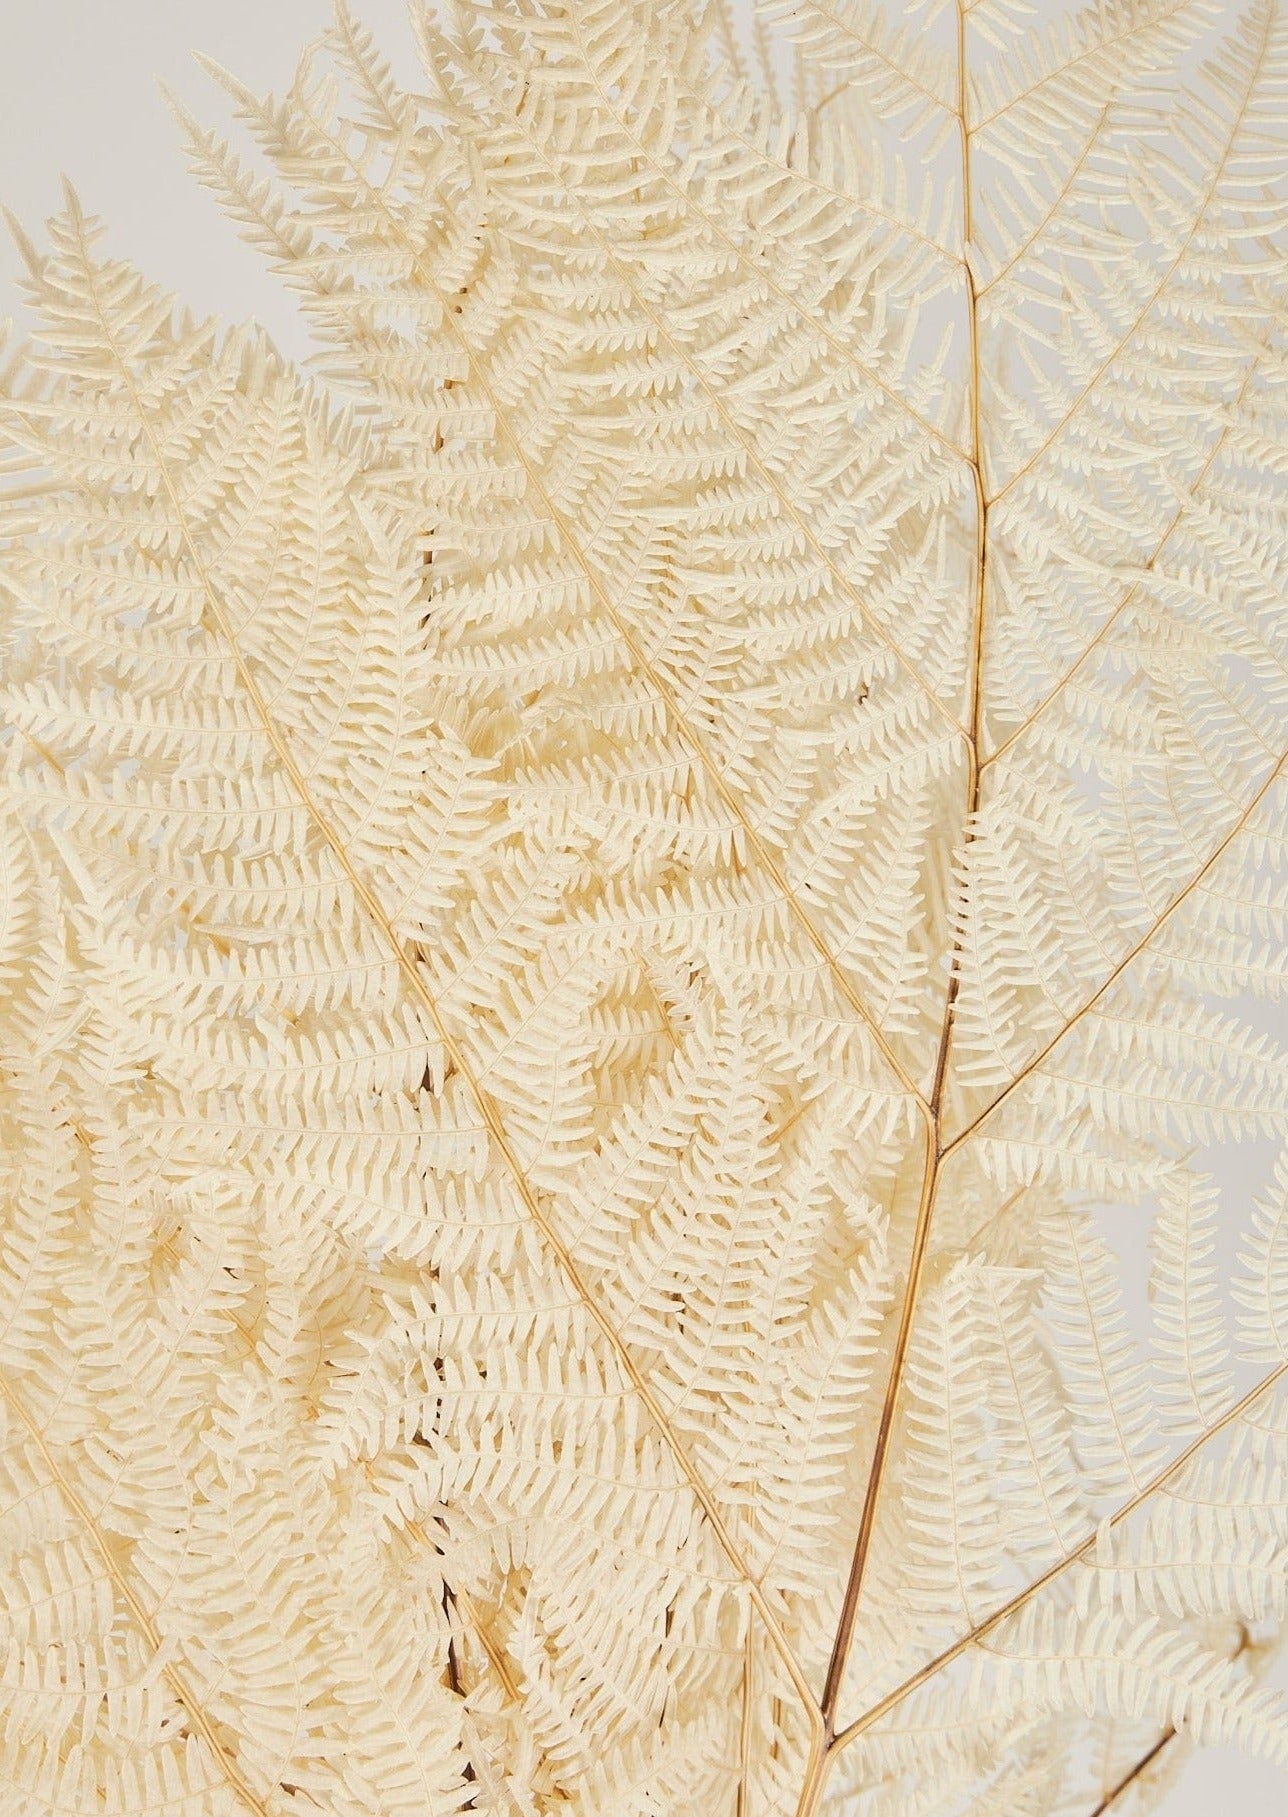 Bleached White Dried Bracken Fern Leaves in Afloral Closeup